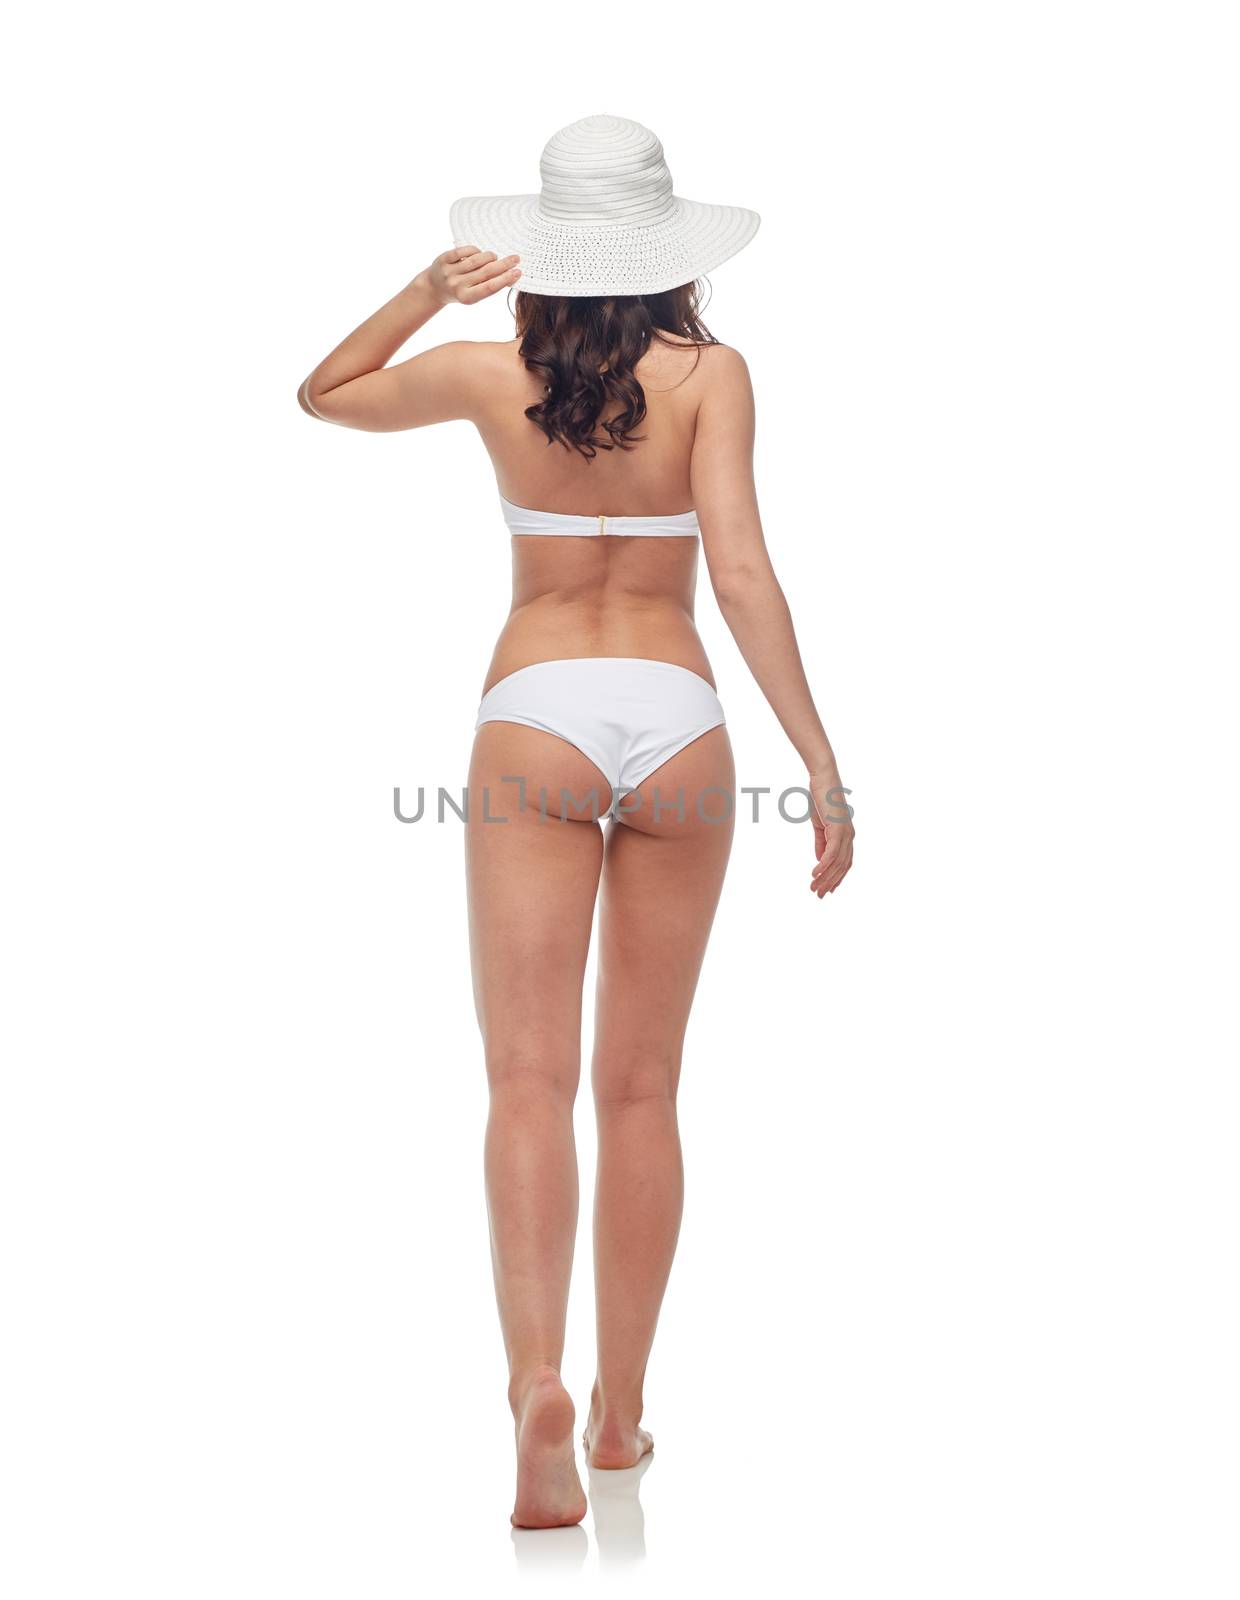 people, fashion, swimwear, summer beach and beauty concept - young woman in white bikini swimsuit from back